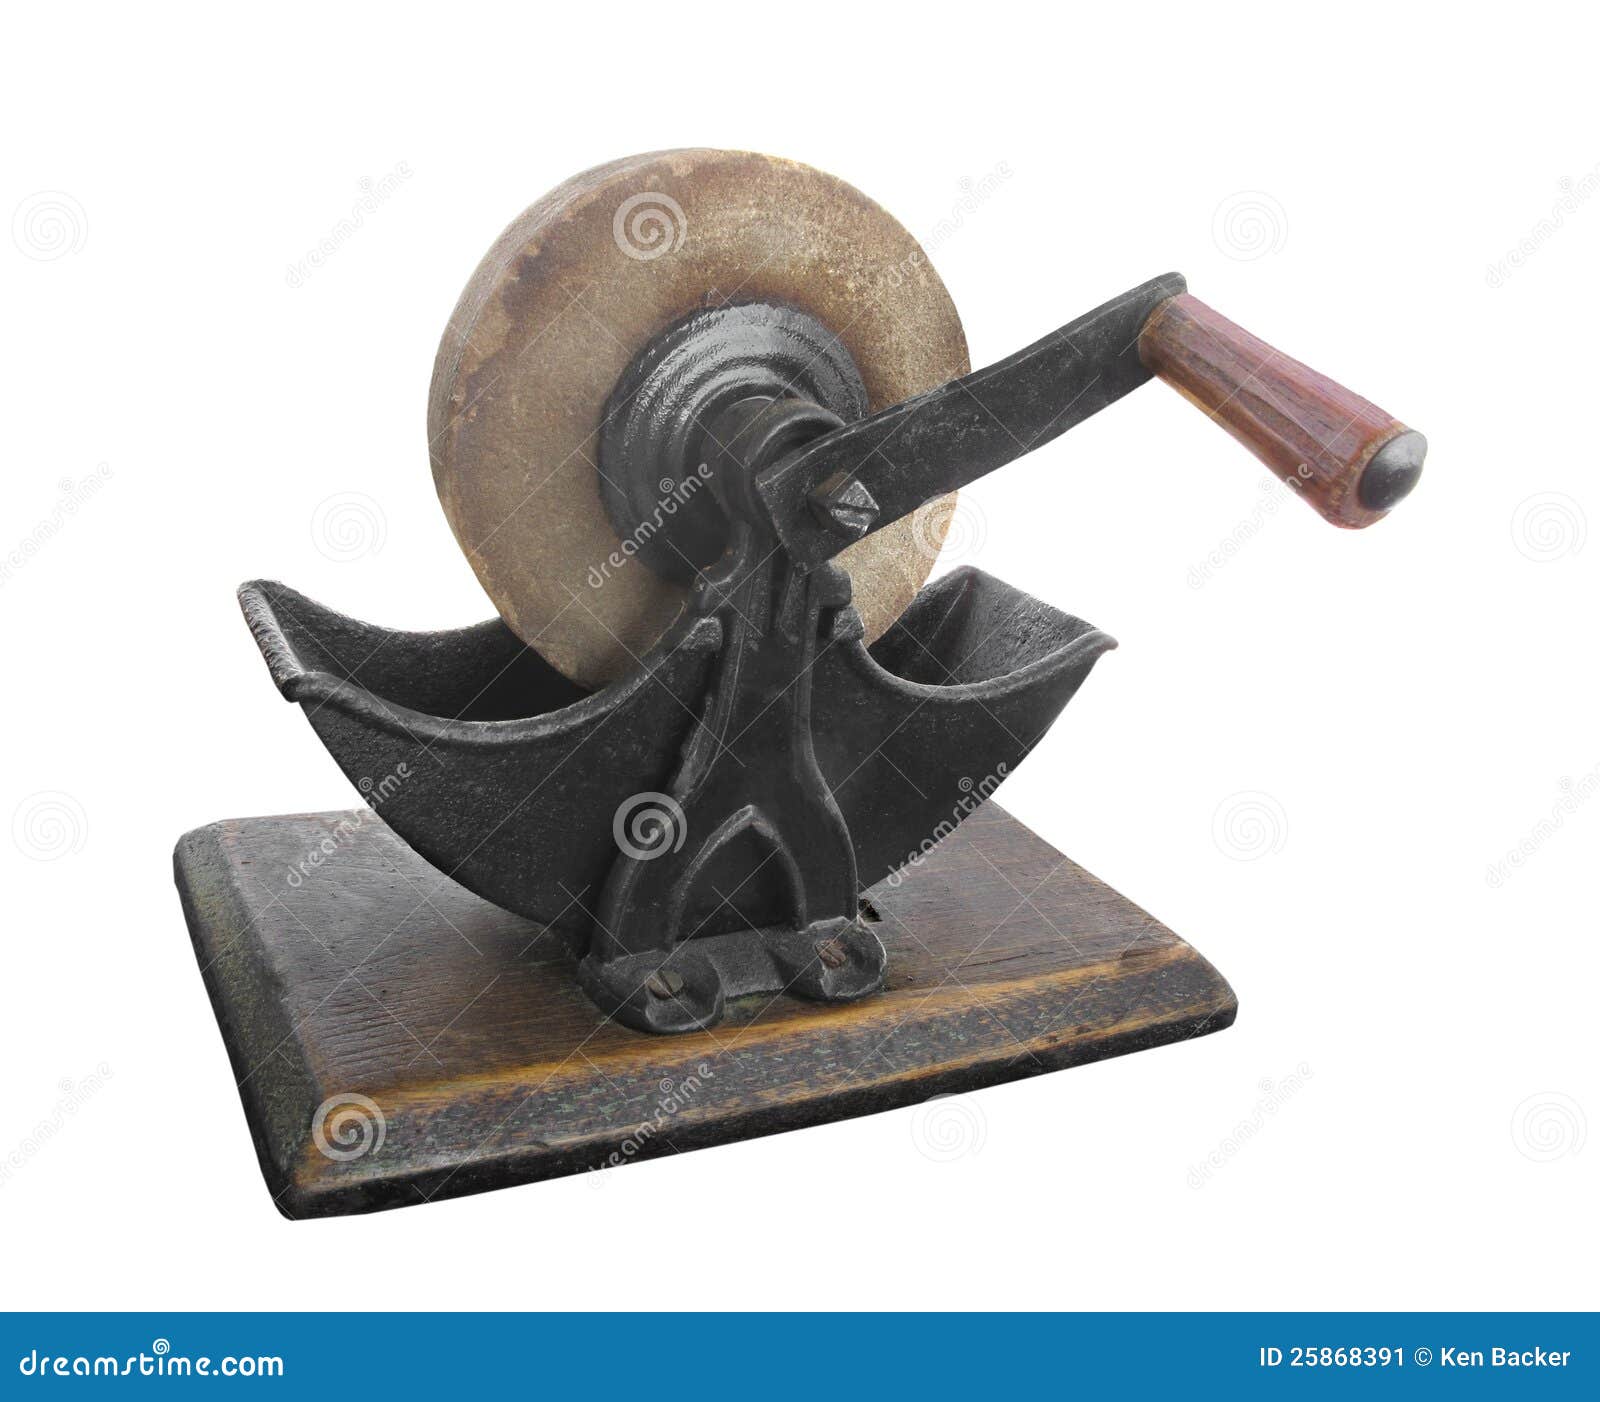 https://thumbs.dreamstime.com/z/old-stone-sharpening-grinding-wheel-isolated-25868391.jpg